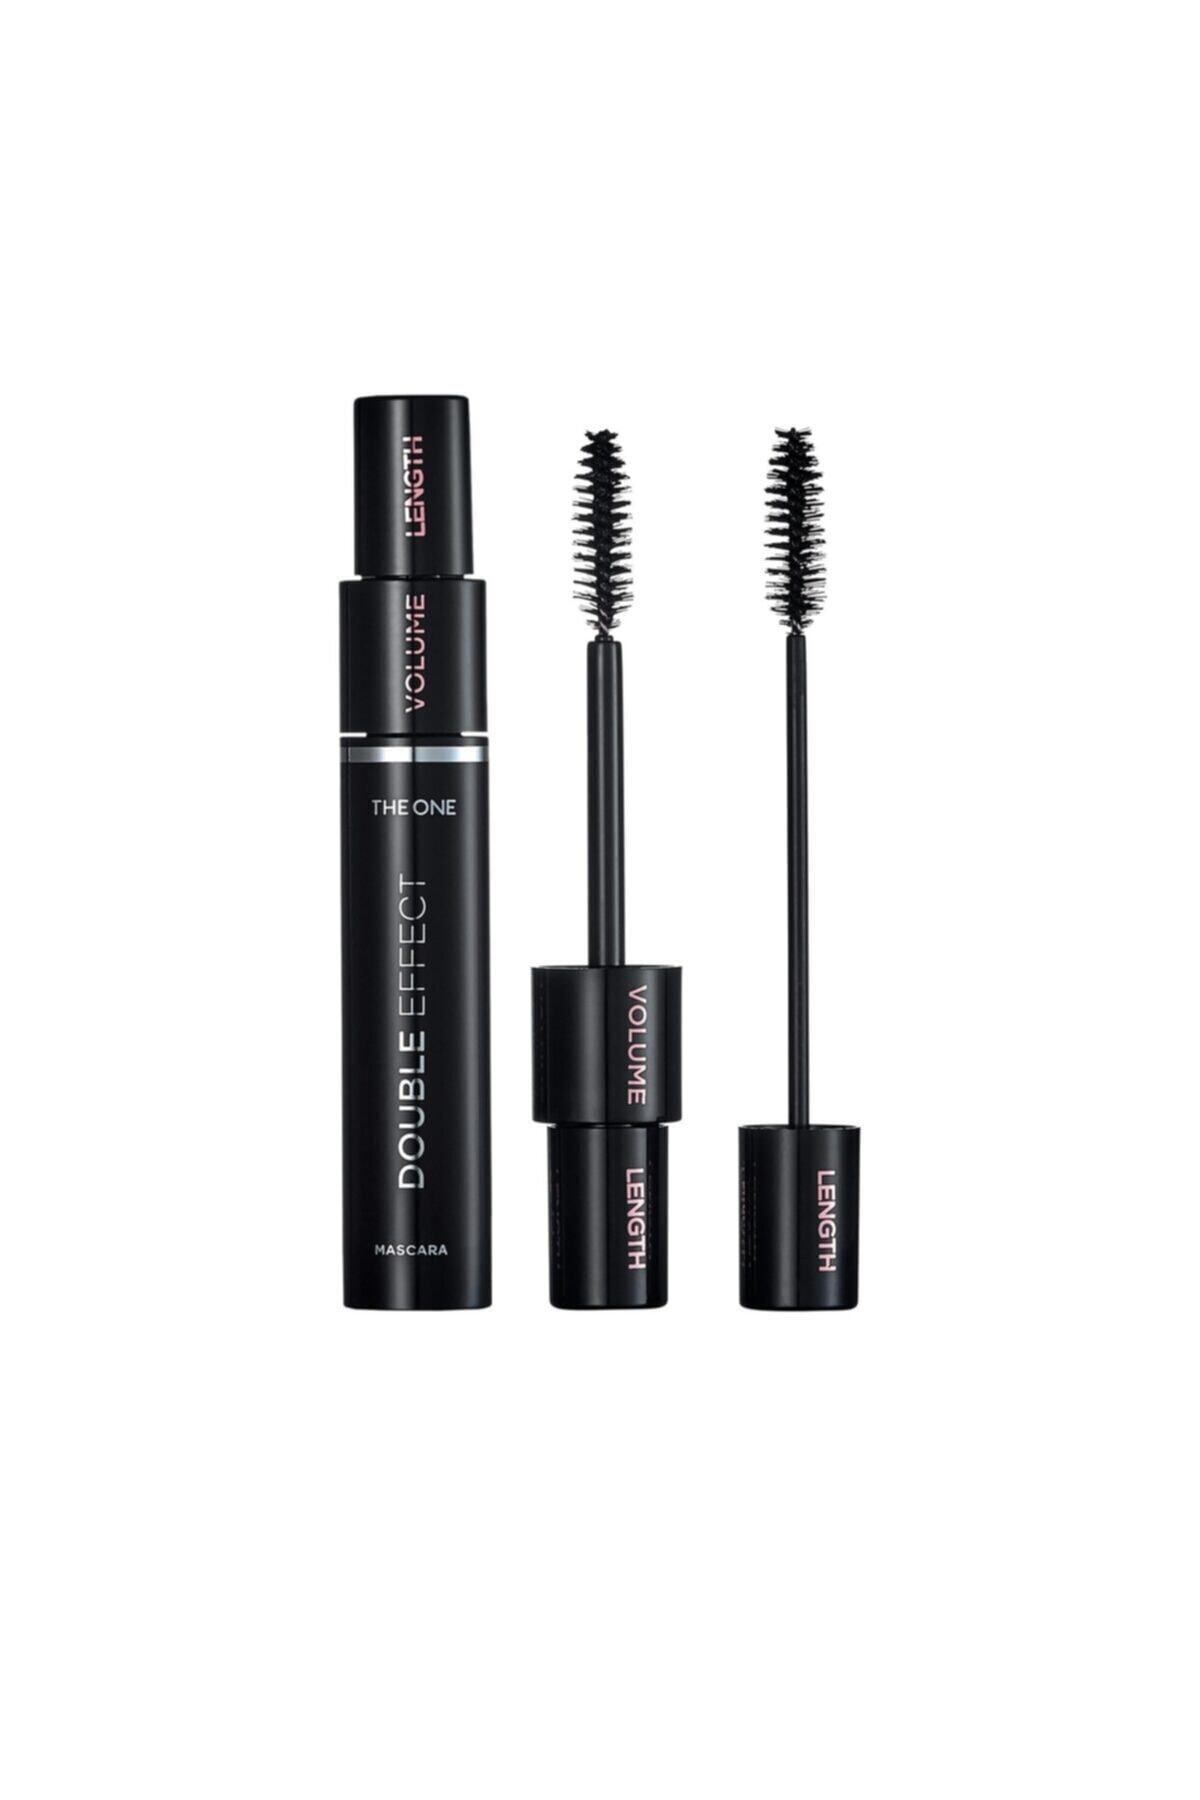 Oriflame The One Double Effect Mascara